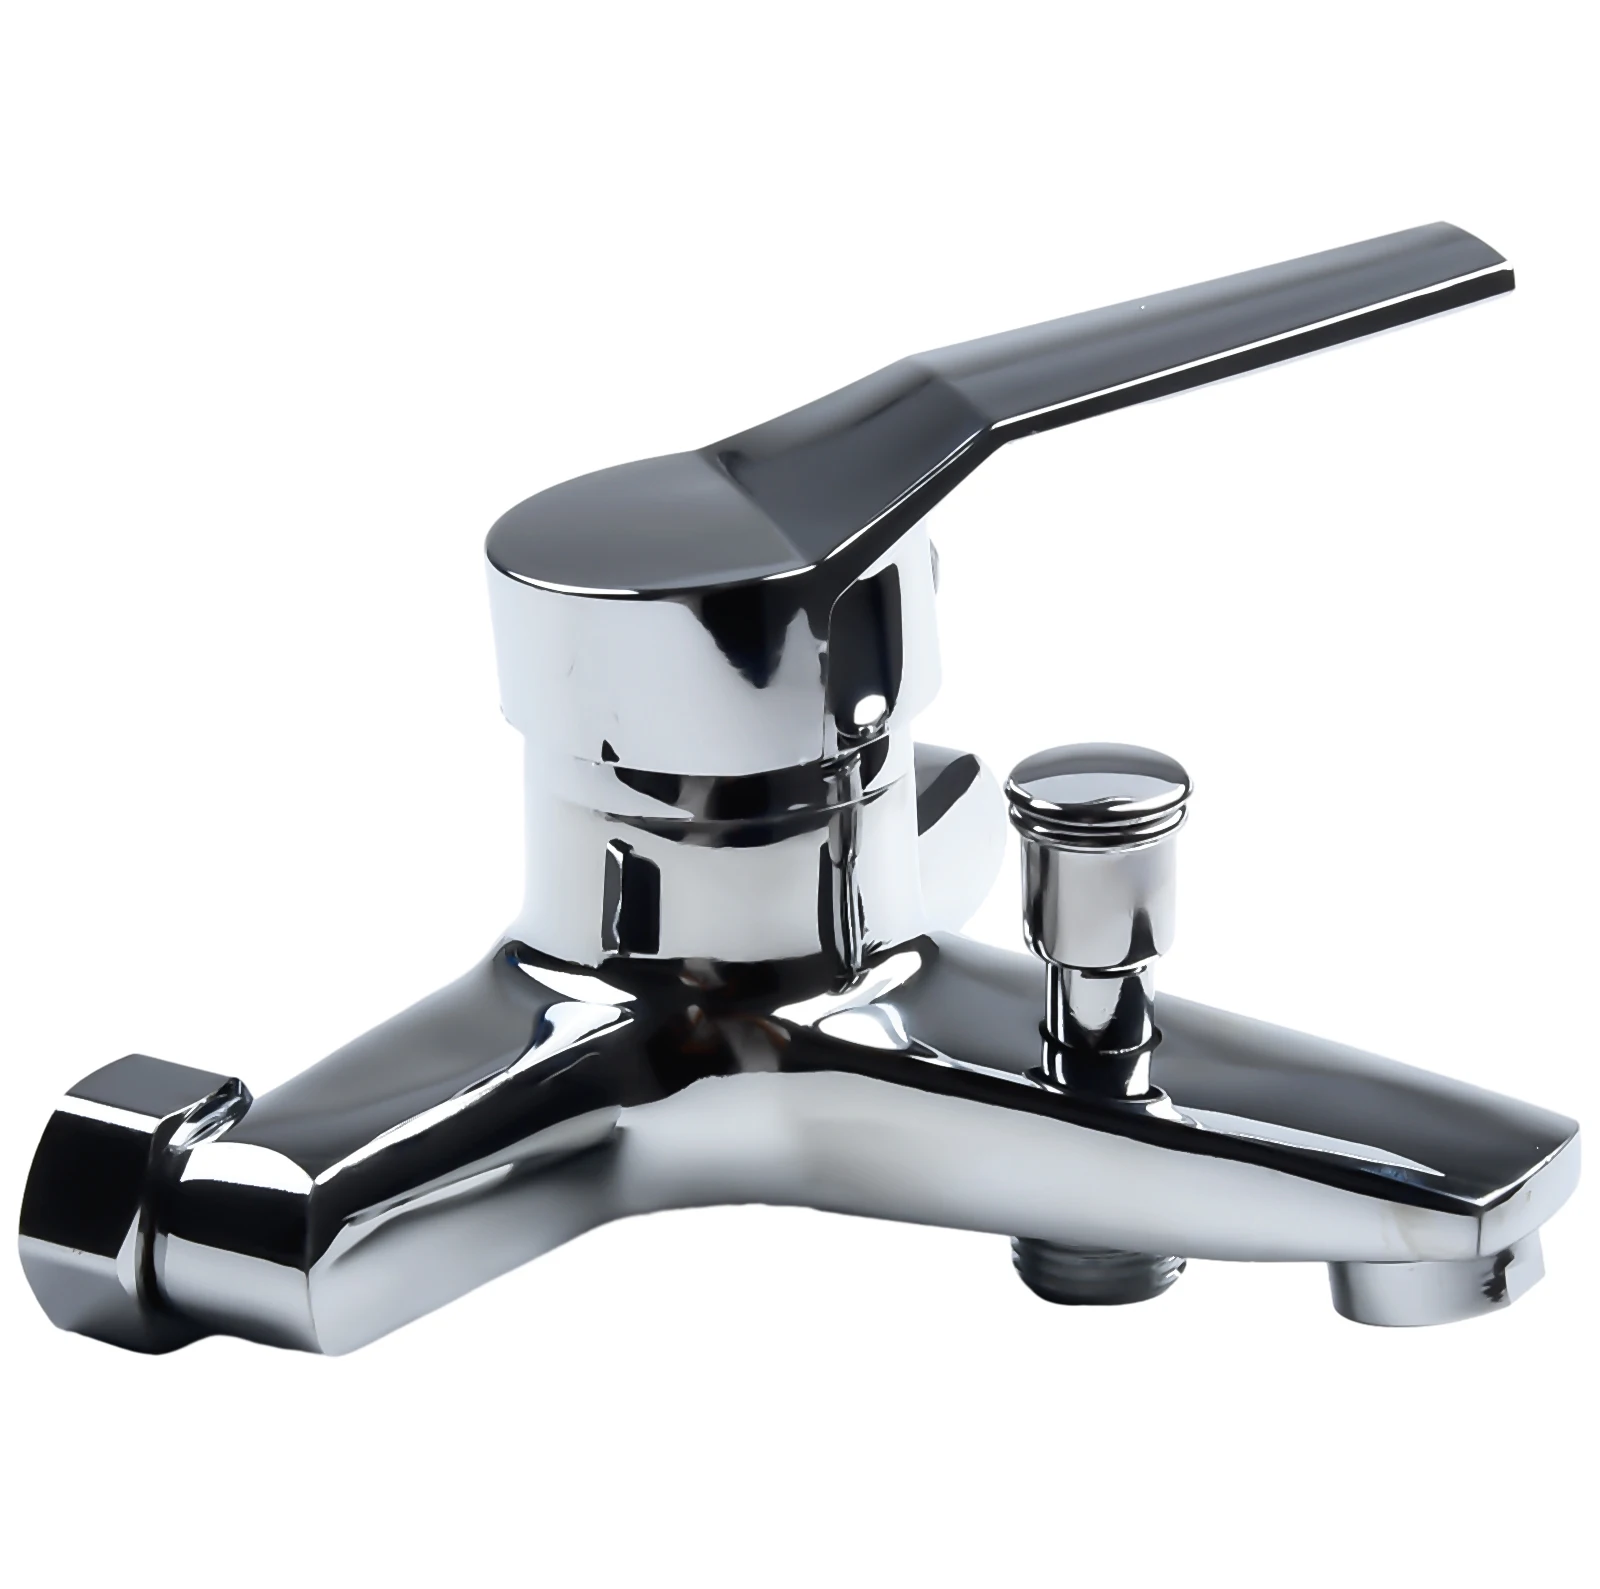 

Tap Basin Faucets Bathroom Tap Lead-free Mixer Tap Wall Mounted Zinc Alloy Basin Faucets Chrome Bathroom Hardware